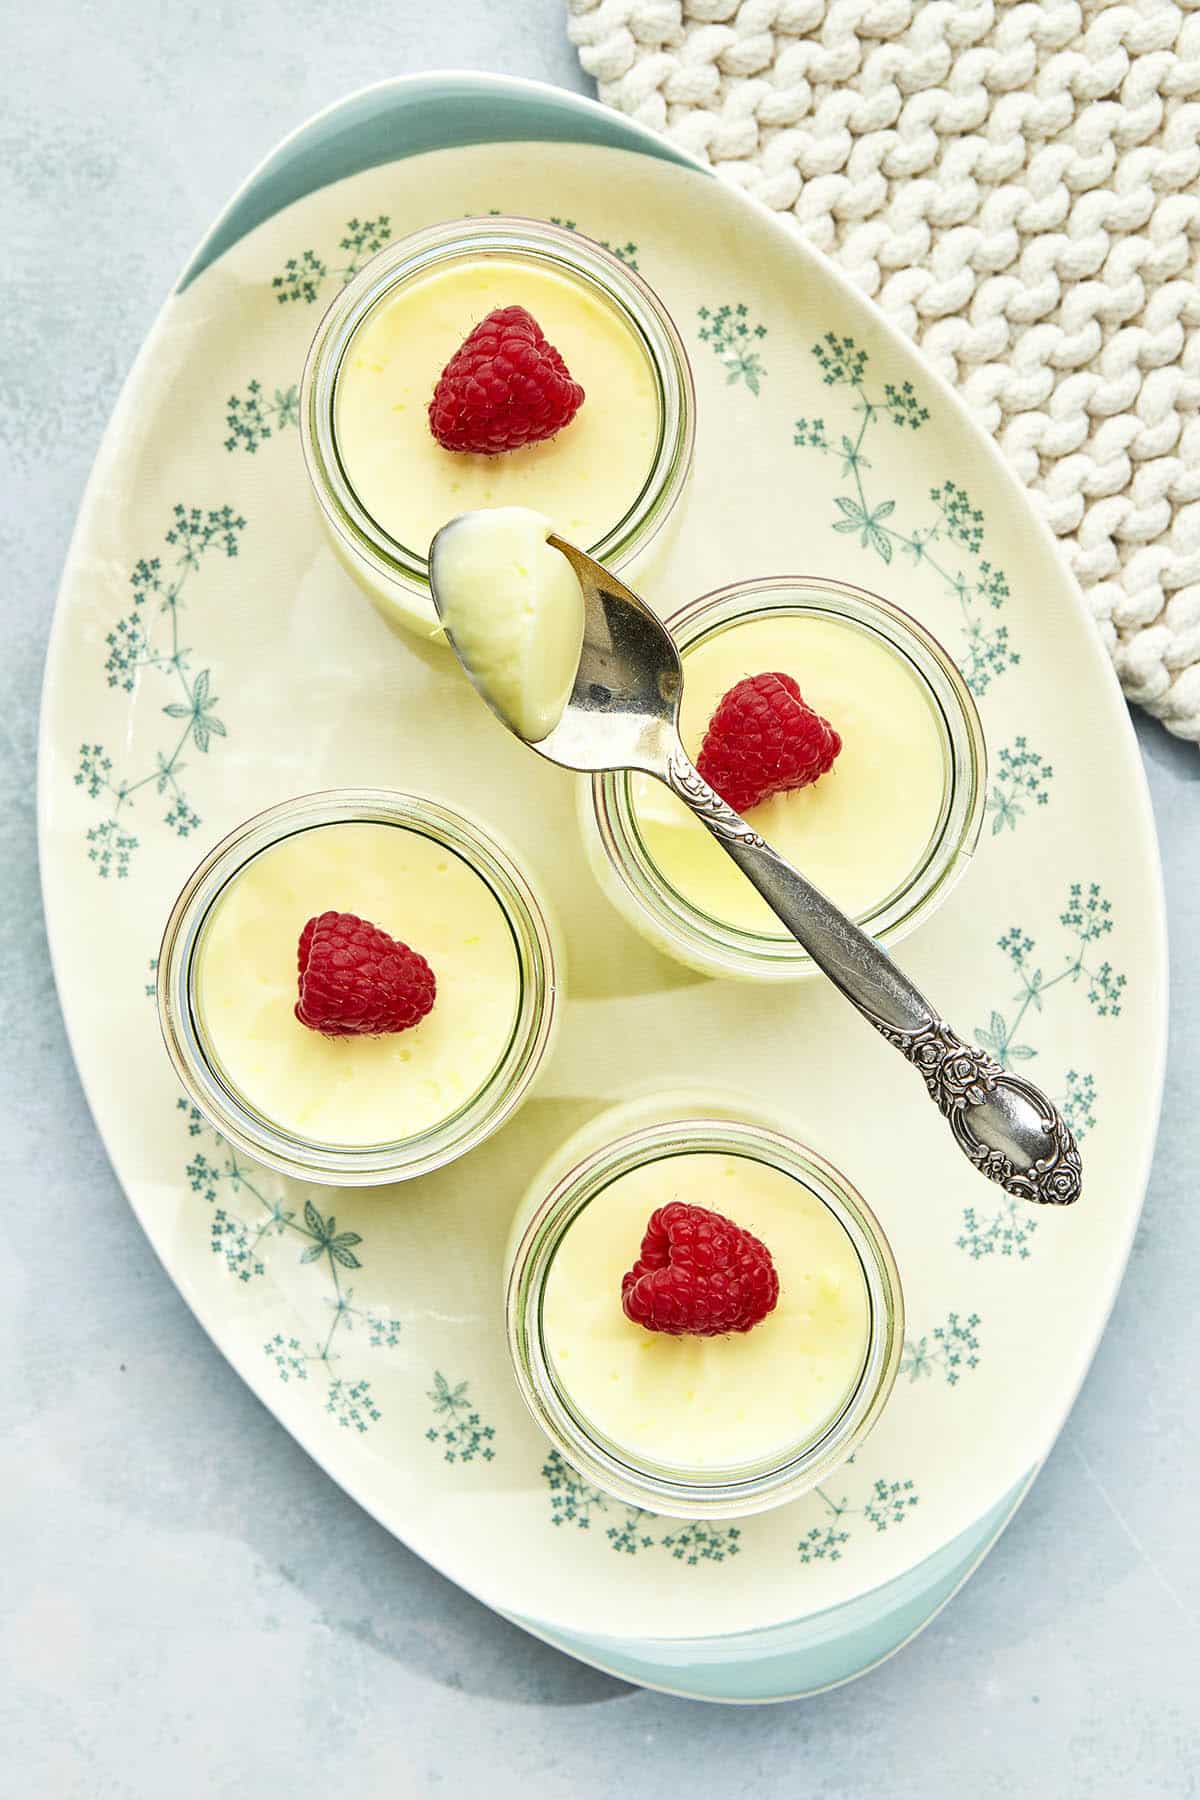 Four jars of lemon posset on an oval platter decorated with light blue flowers, with one spoon on top of one of the jars with some of the dessert spooned out.